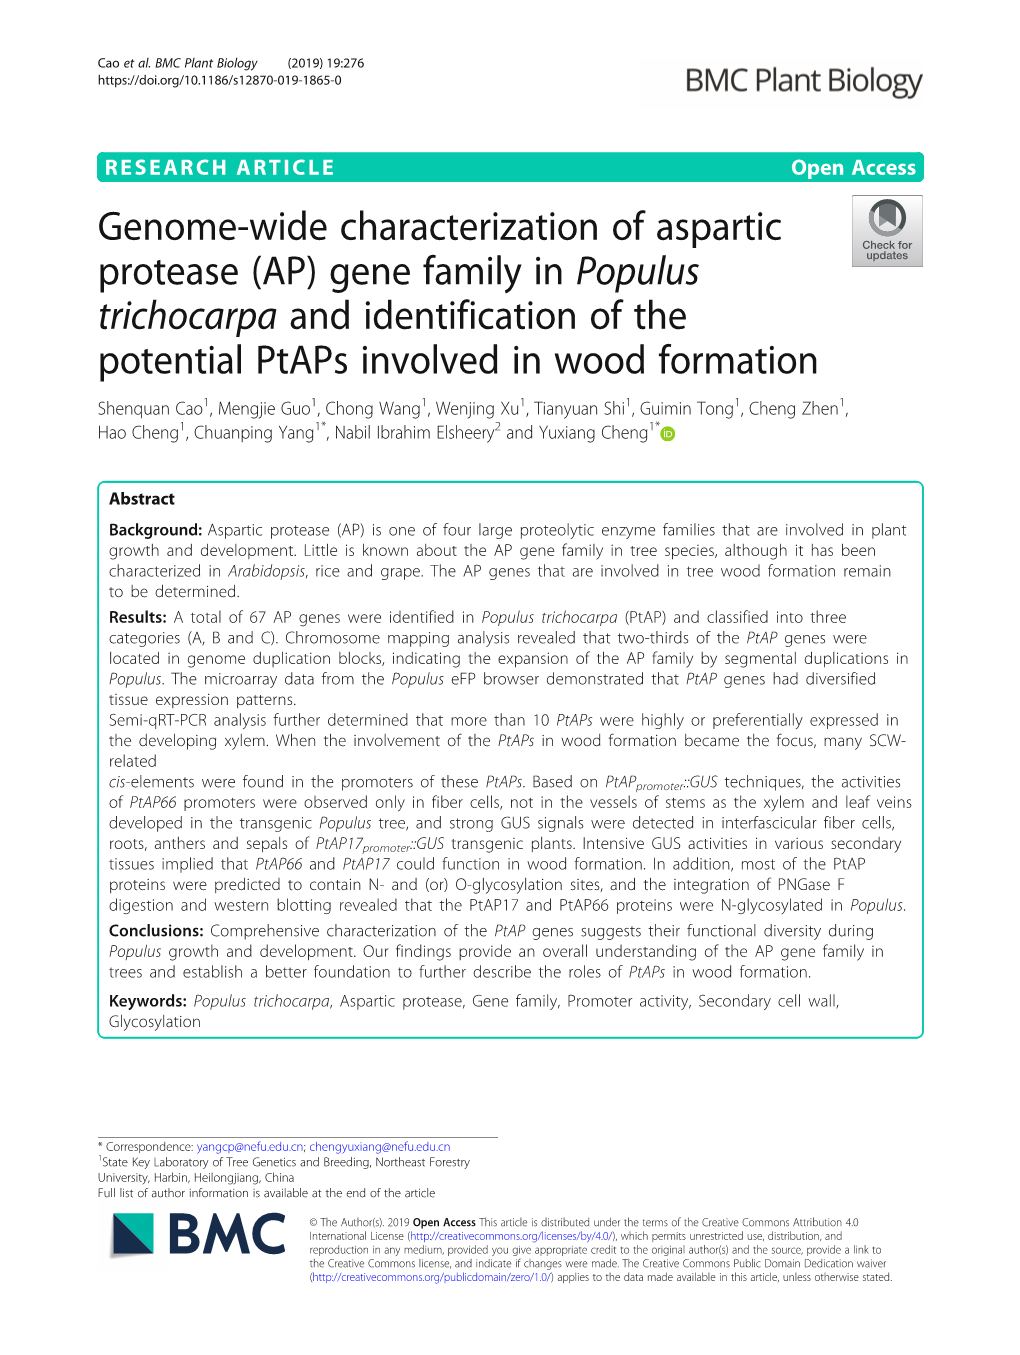 Genome-Wide Characterization of Aspartic Protease